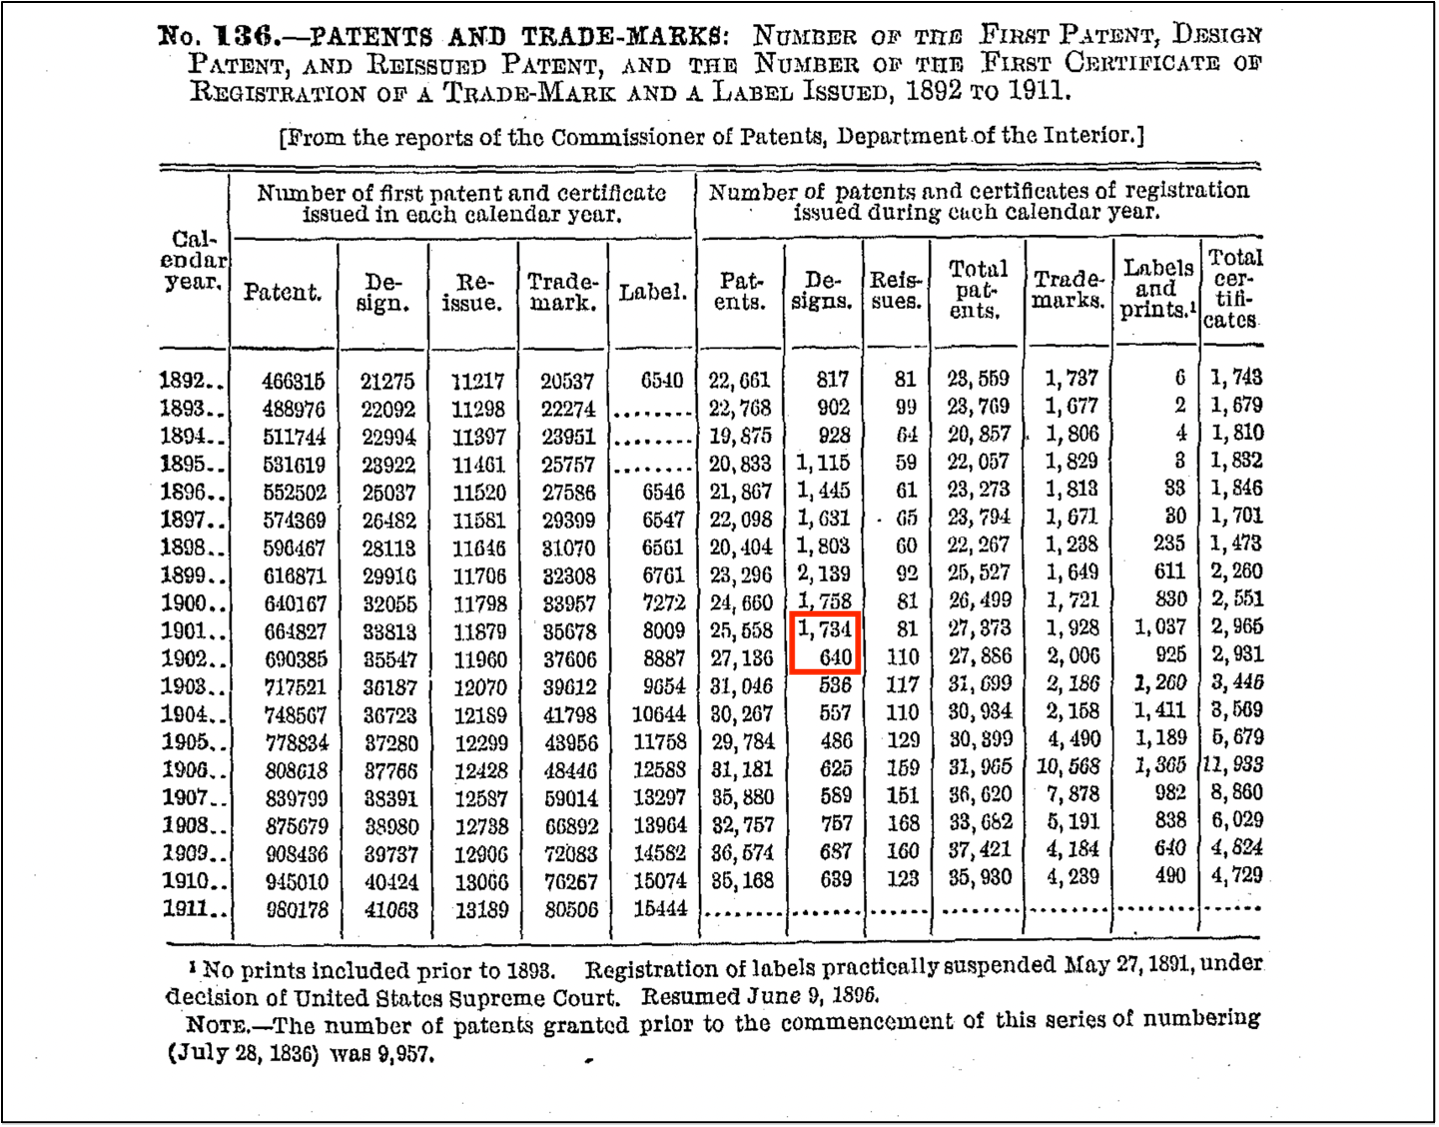 Printed chart with header reading "No. 136.—Patents and Trade-Marks." Under the column "Designs," two numbers are highlighted in red, indicating a decrease in design patterns between 1901 and 1902 from 1,734 to 640.